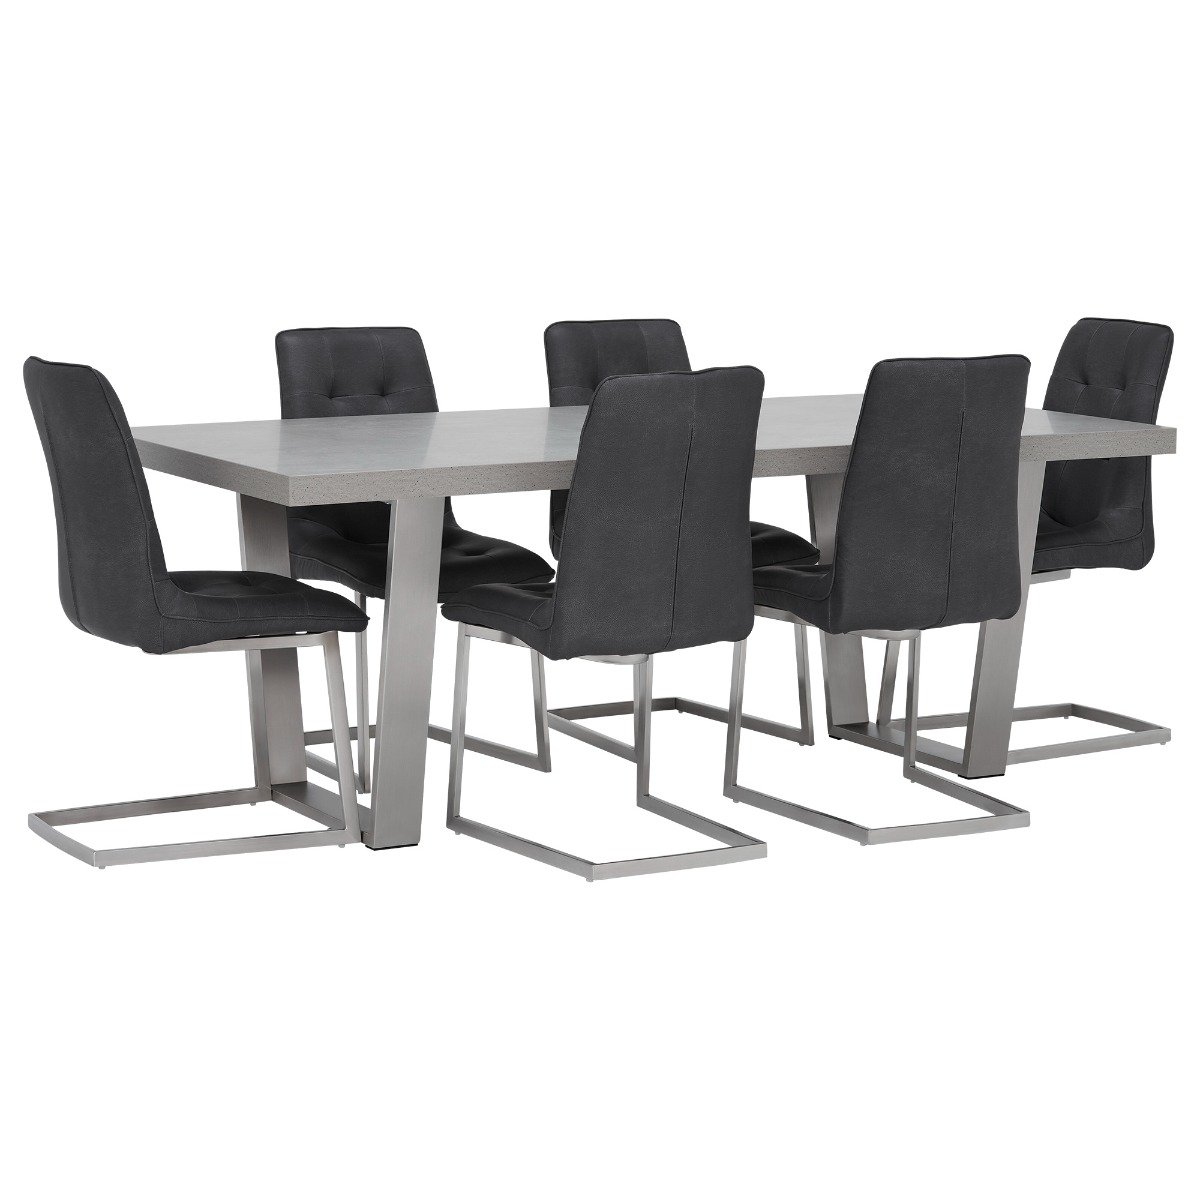 Photo of Halmstad 200cm dining table & 6 ericka chairs in grey